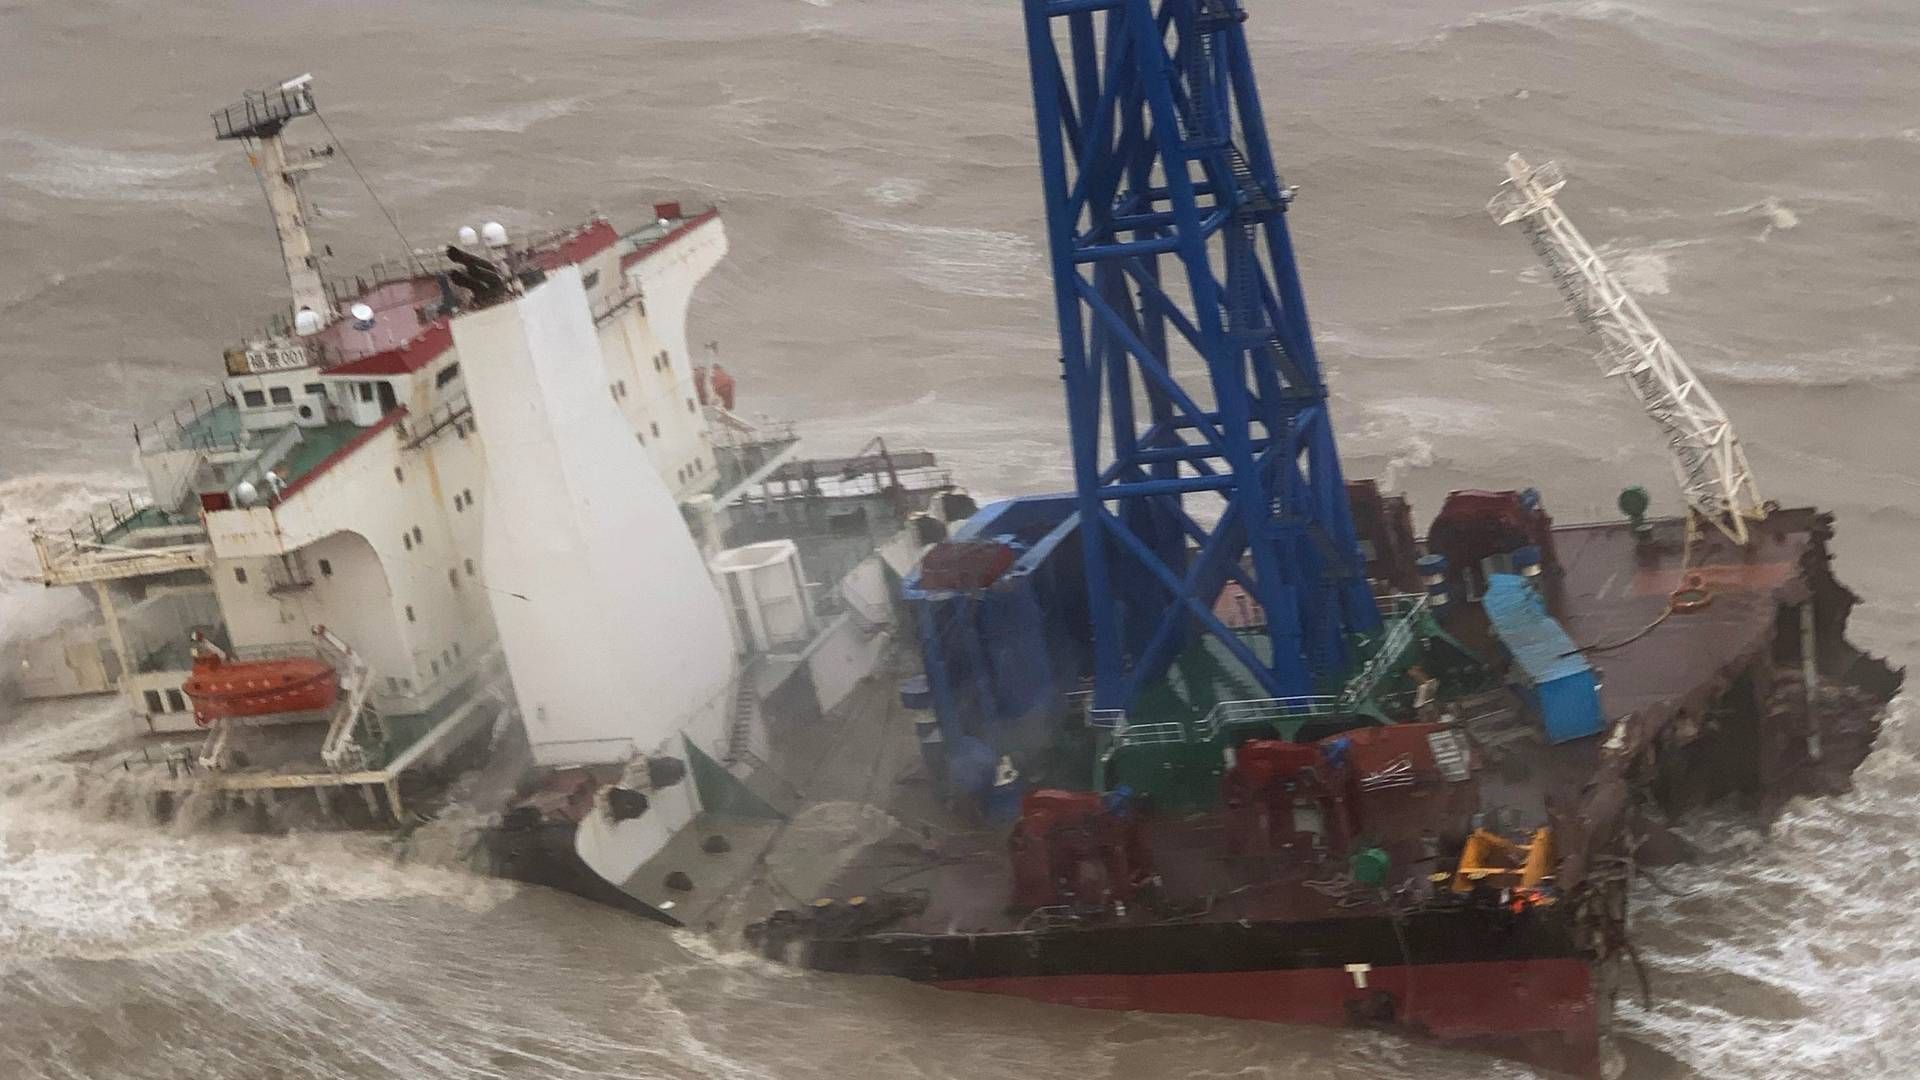 The vessel broke in two before it sank. | Photo: AFP / GOVERNMENT FLYING SERVICE/AFP / GOVERNMENT FLYING SERVICE